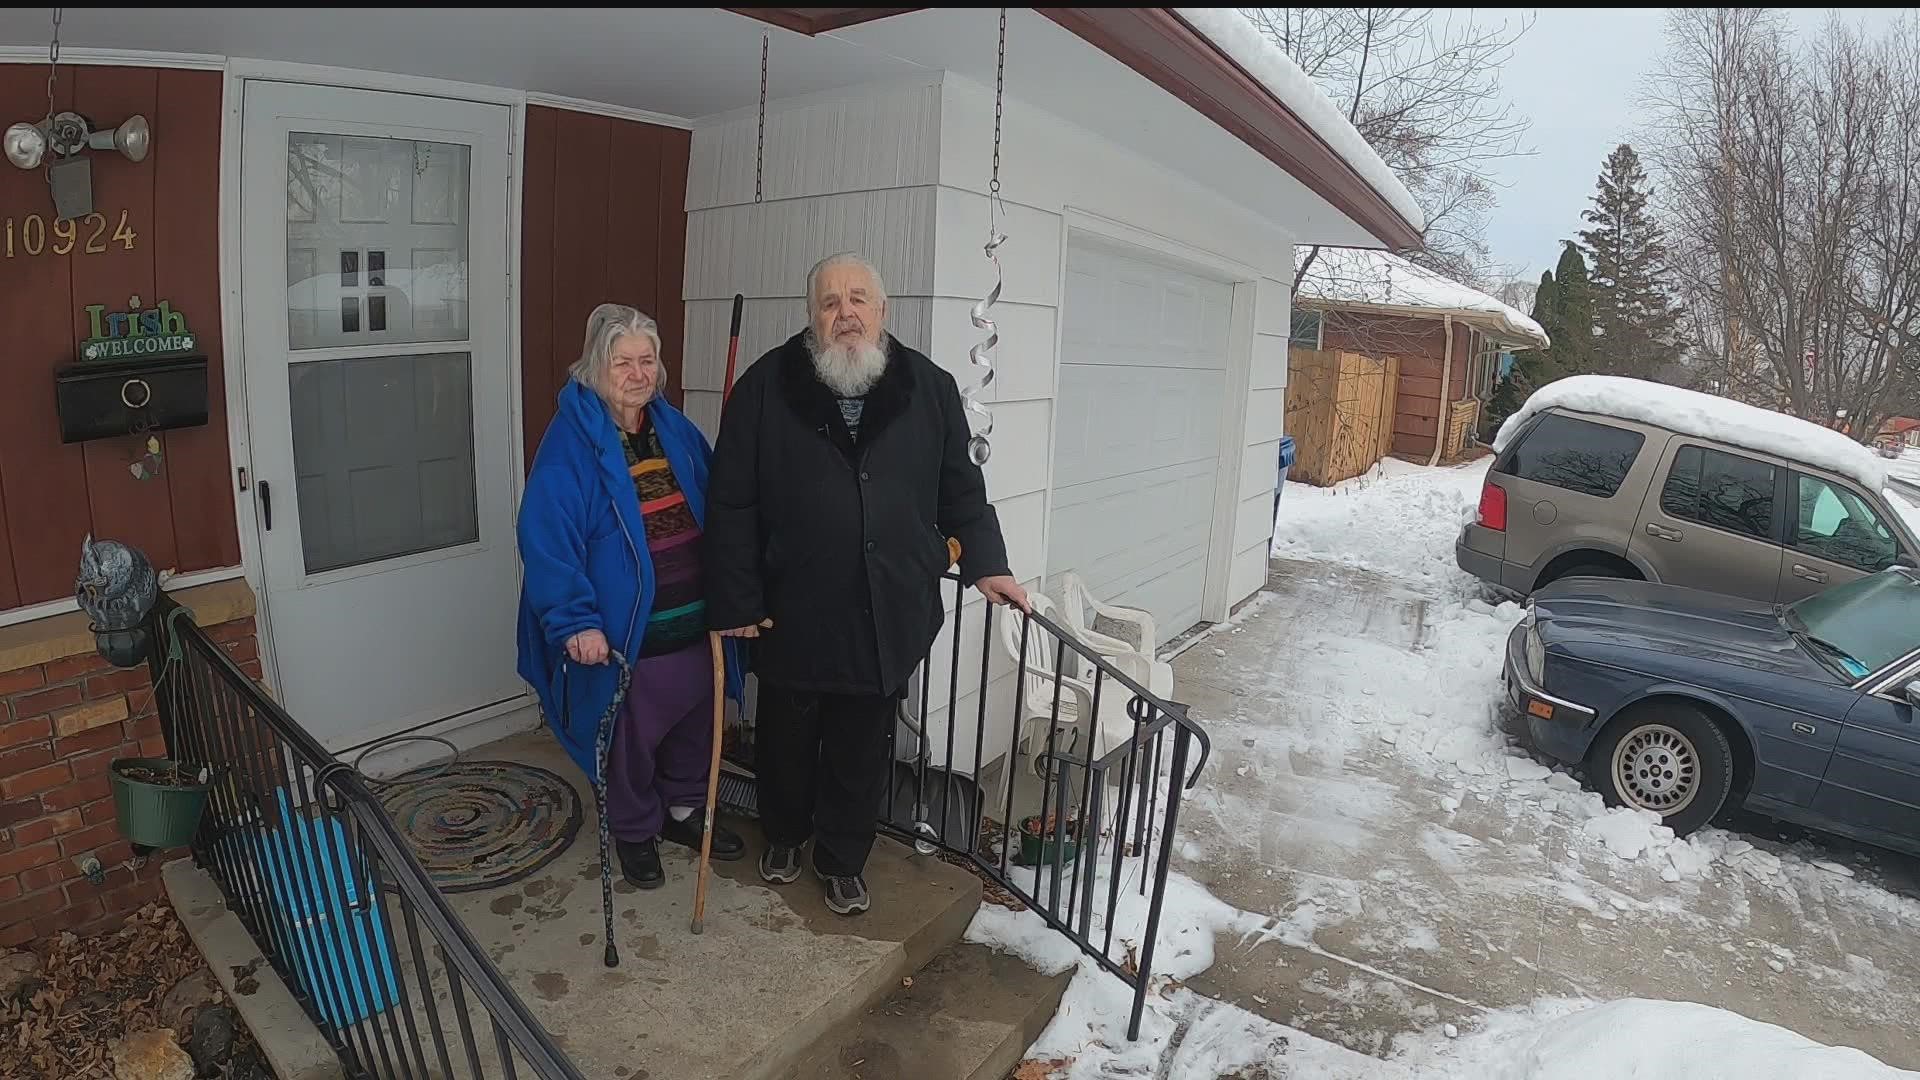 These "Guardian Snow Angels" are helping the elderly get out and about during Minnesota winters.